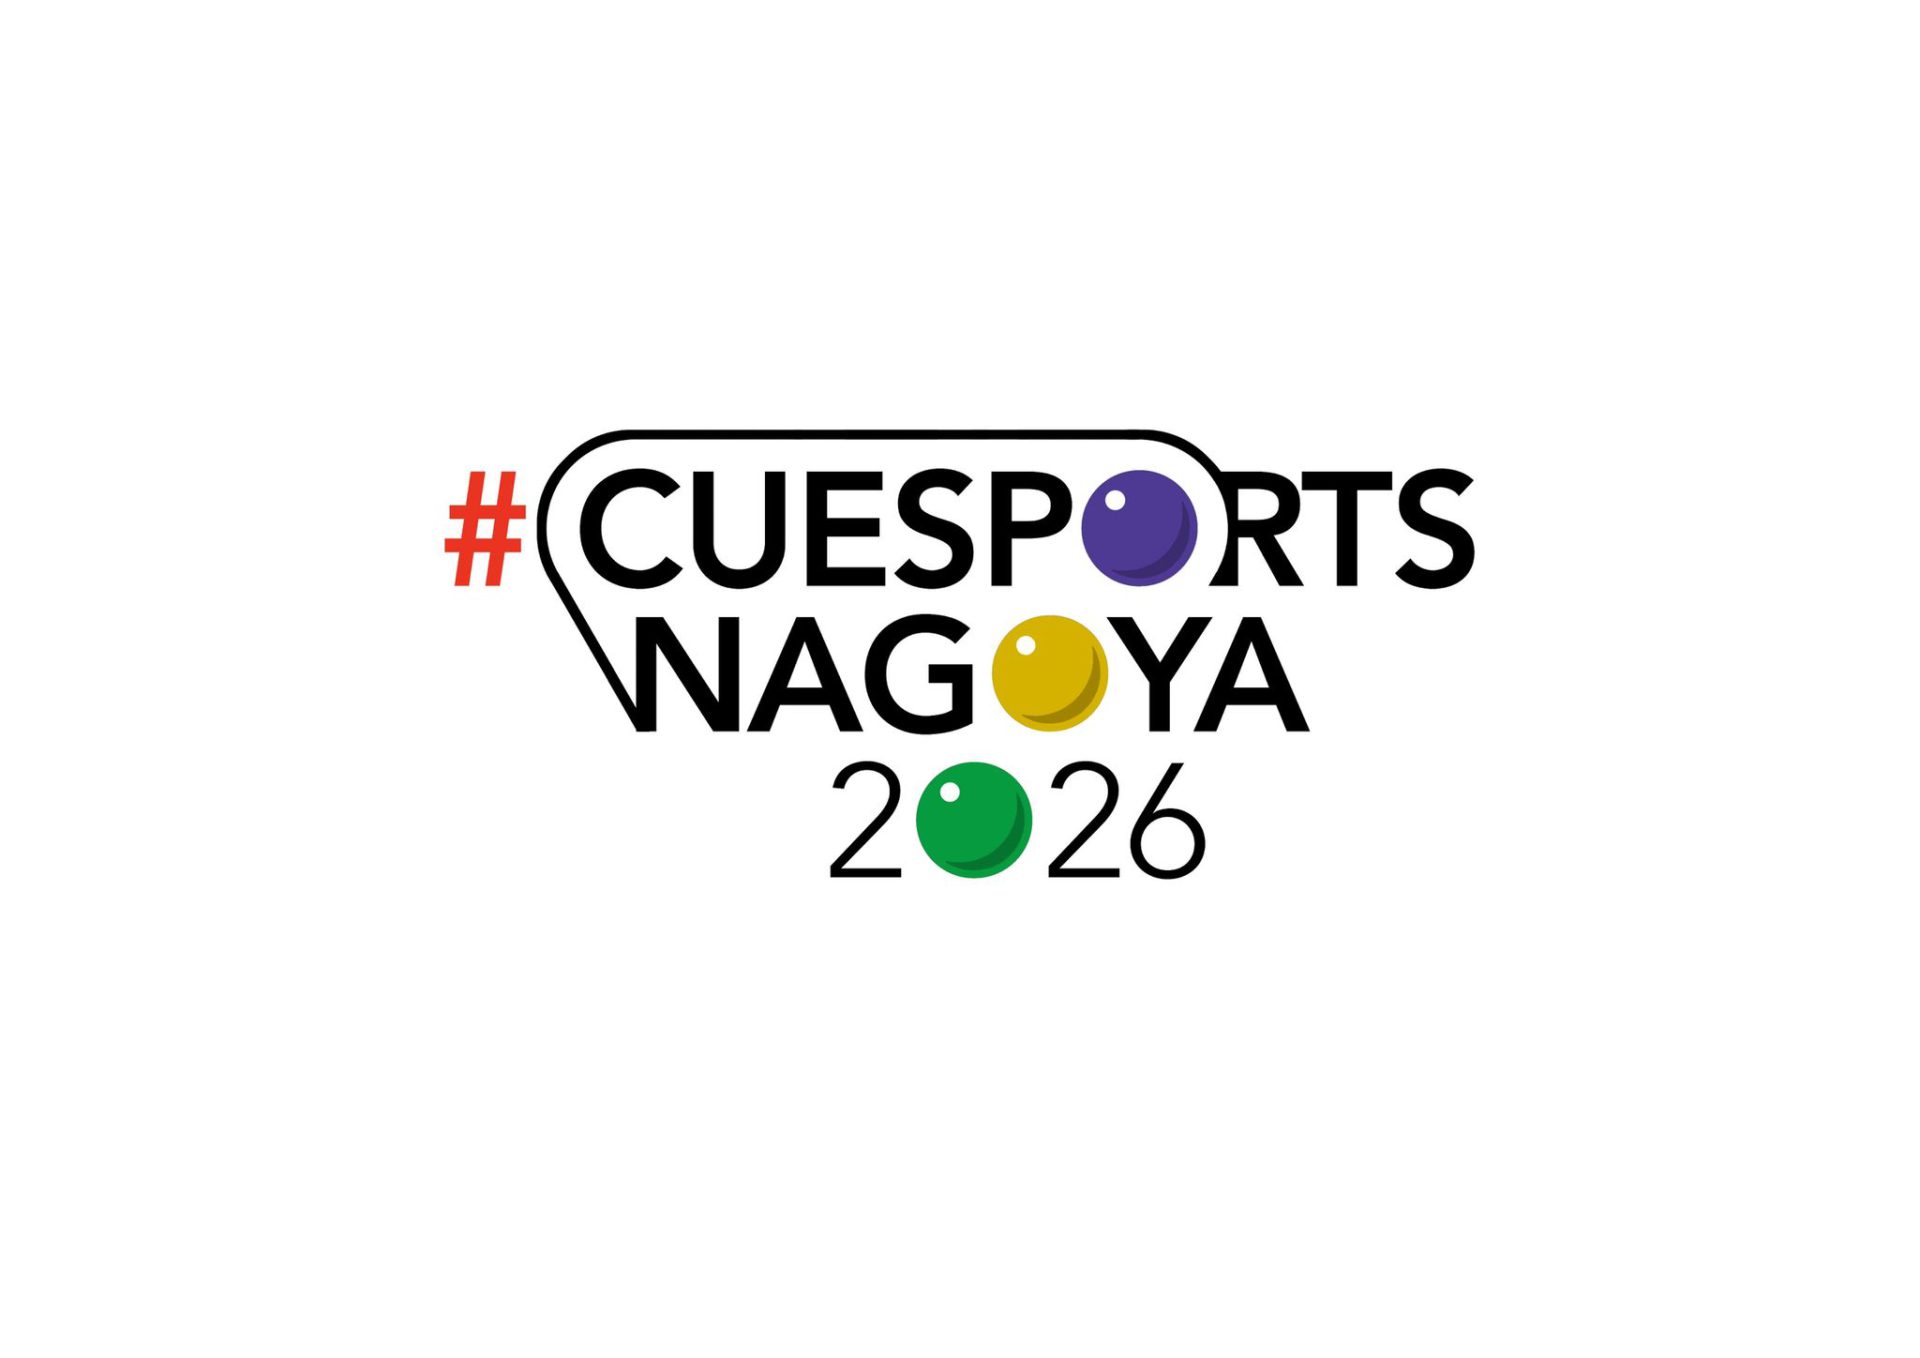 Campaign for Cuesports to be included in 2026 Nagoya Asian Games